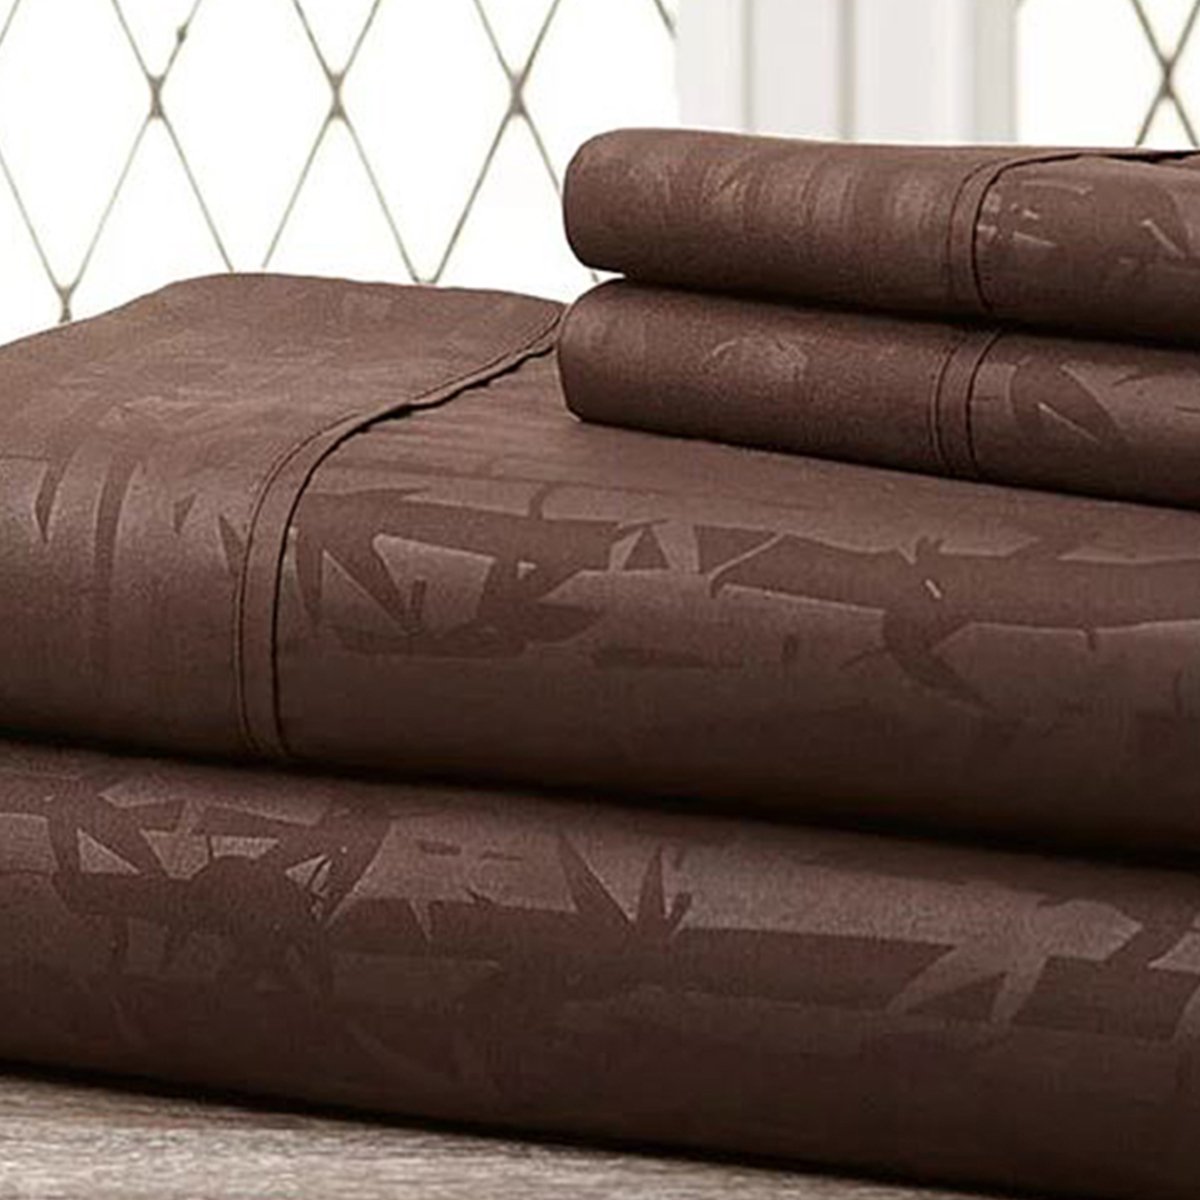 Hny-4pc-eb-cho-f Super-soft 1600 Series Bamboo Embossed Bed Sheet, Chocolate - Full, 4 Piece